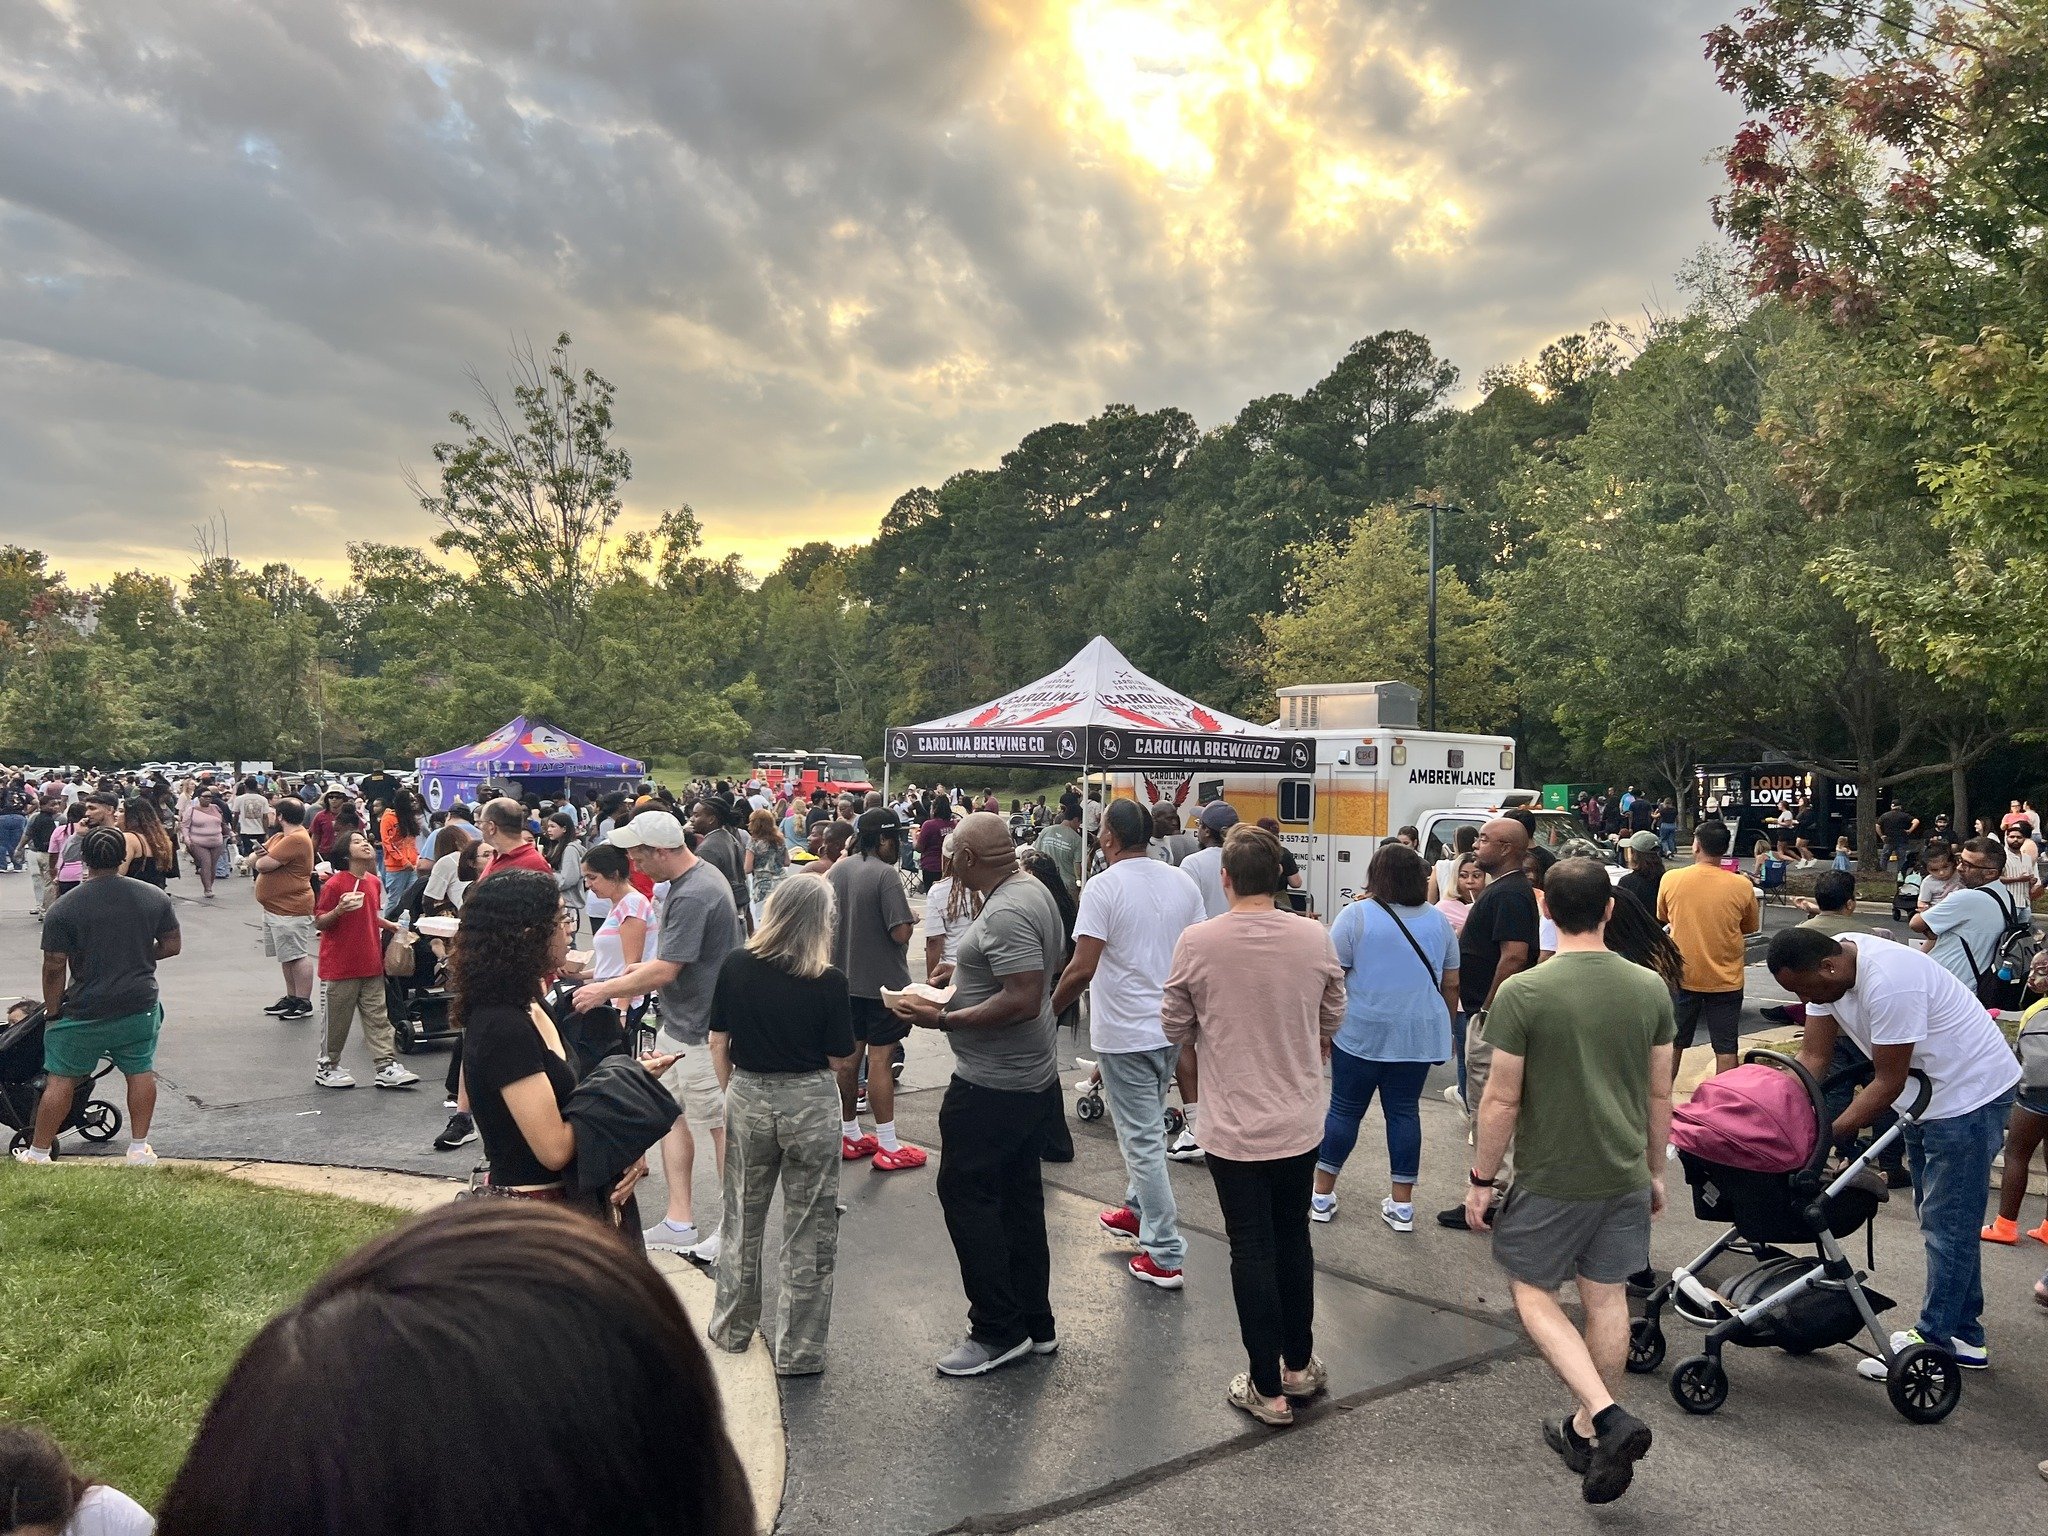 The Spring Brier Creek Food Truck Festival is less than a month away! 🍔 Get ready for a night full of good eats, entertainment, and family fun! 

For more information, click the link in bio 🚚